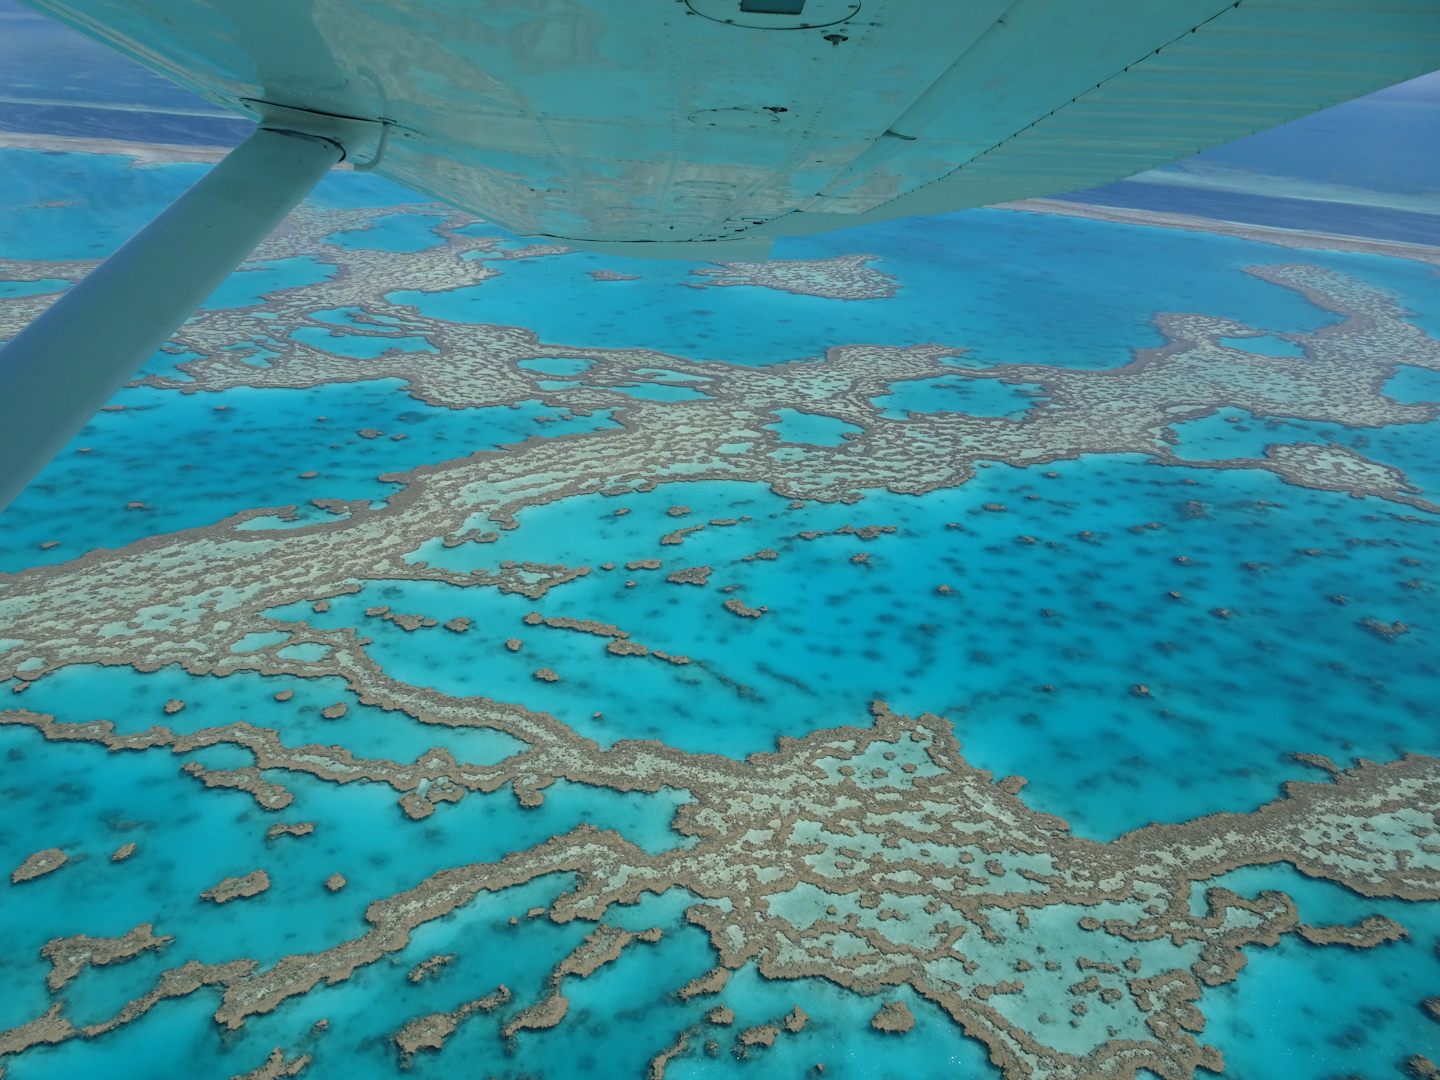 This is a view of the Great Barrier Reef taken from small airplane when ship was at Airlie Beach